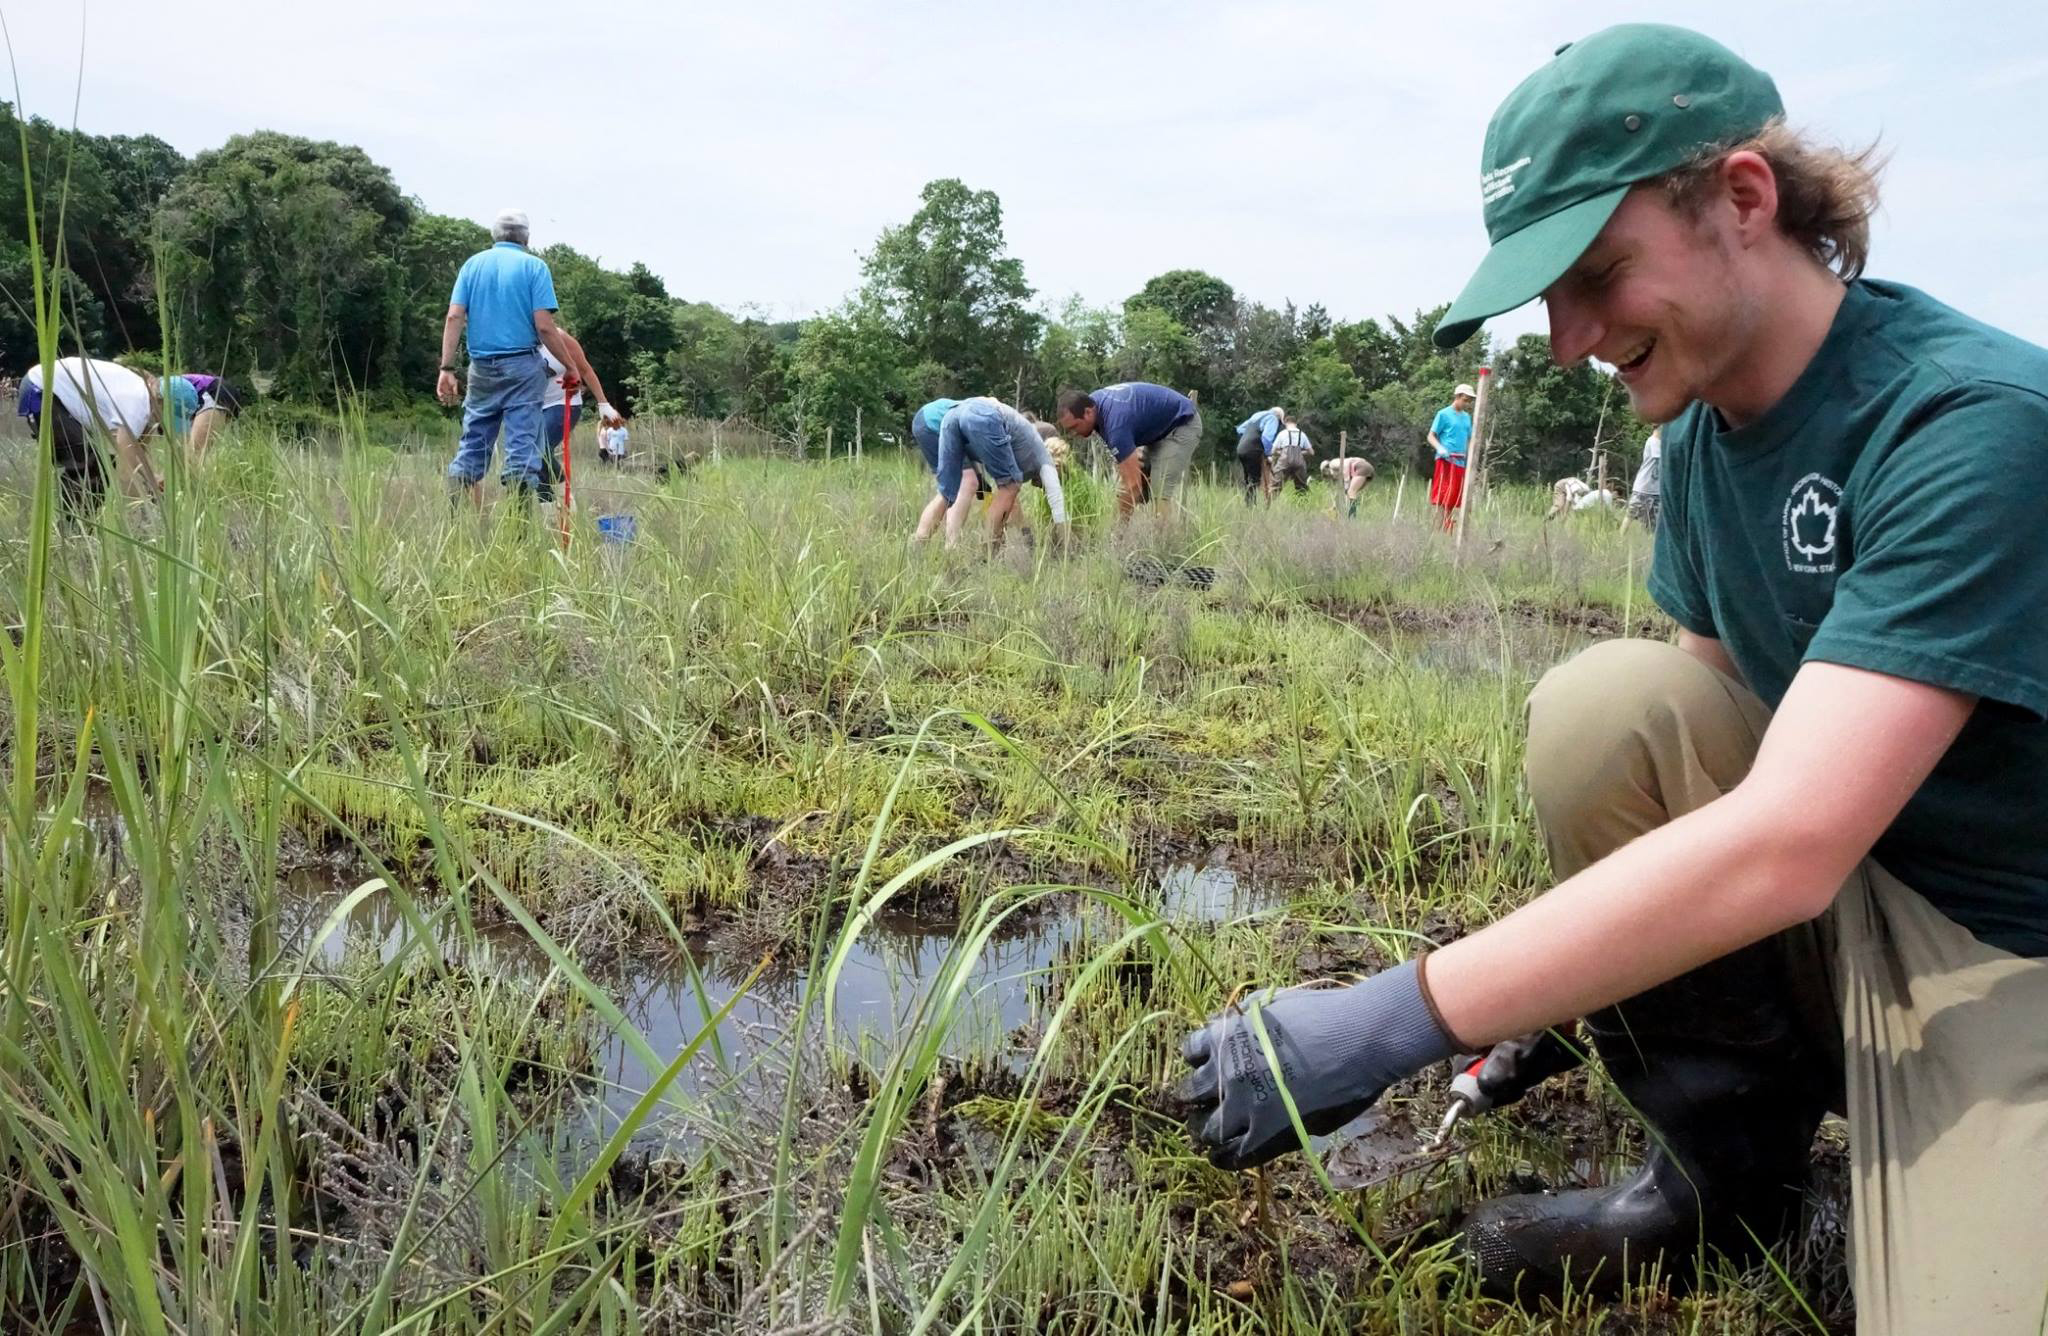 Volunteers join a New York State Parks employee in planting salt marsh grasses at Sunken Meadow State Park. Credit: Save the Sound.